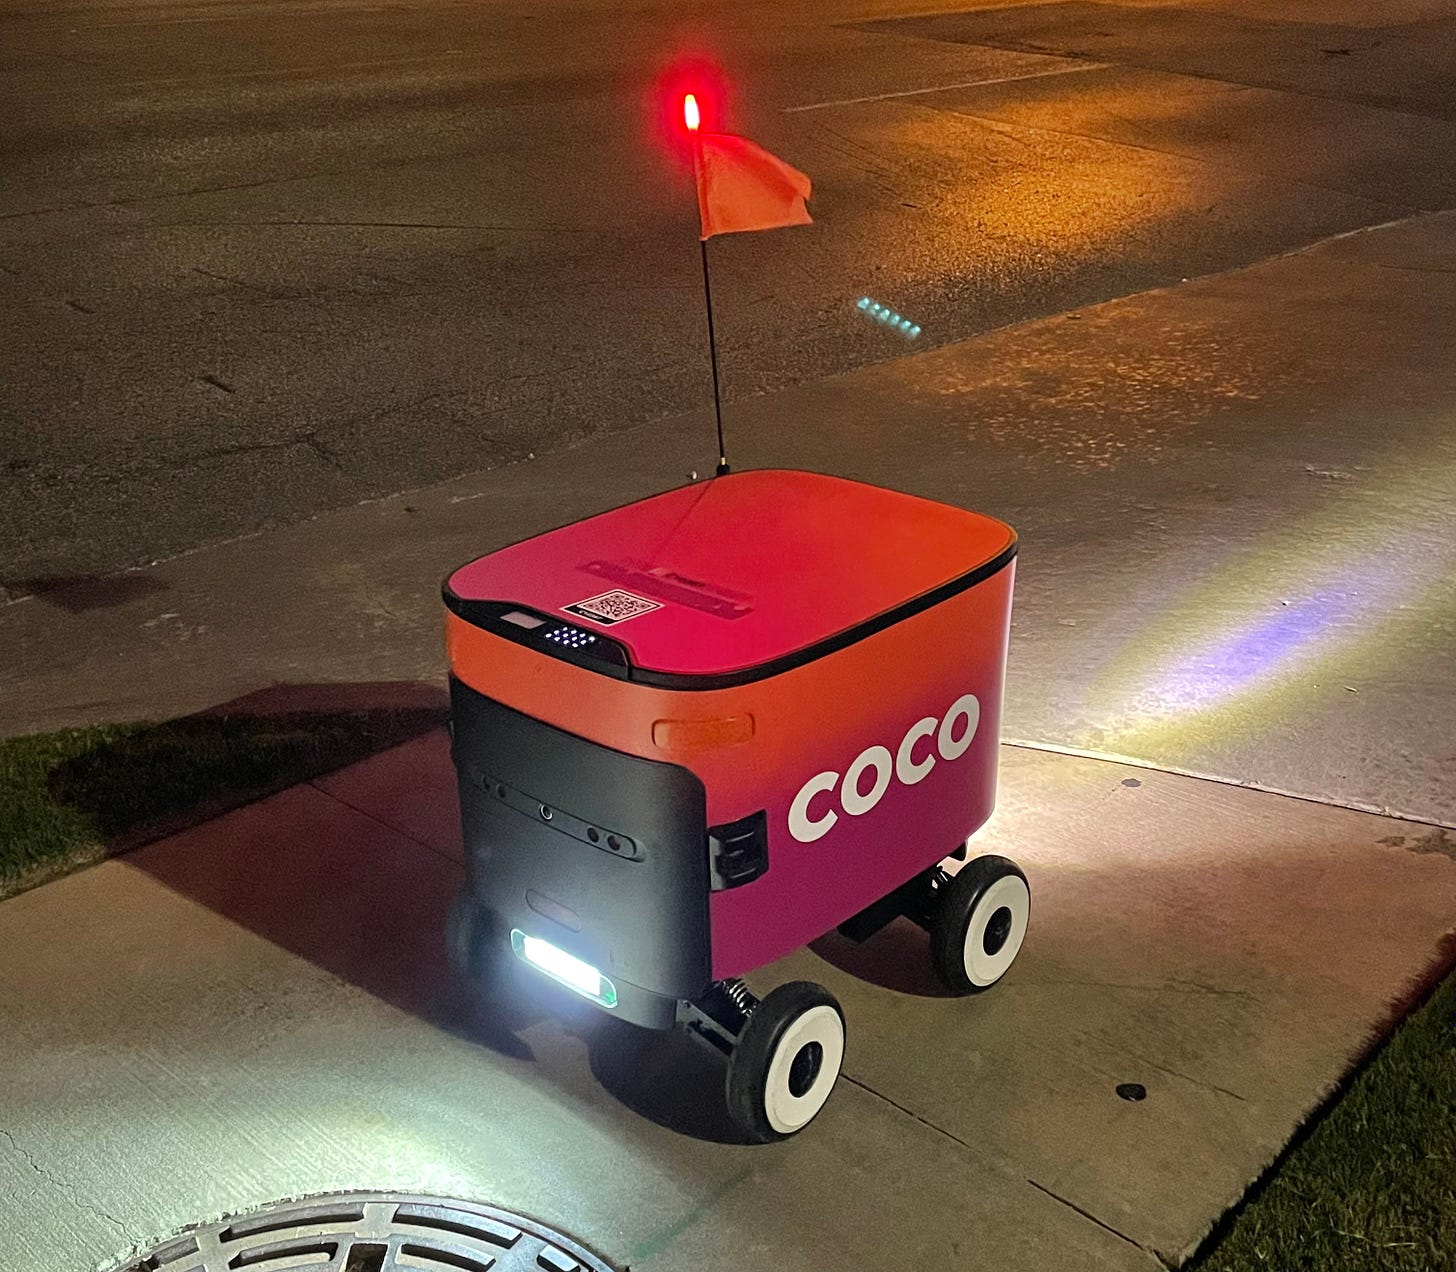 A small red delivery robot on a sidewalk